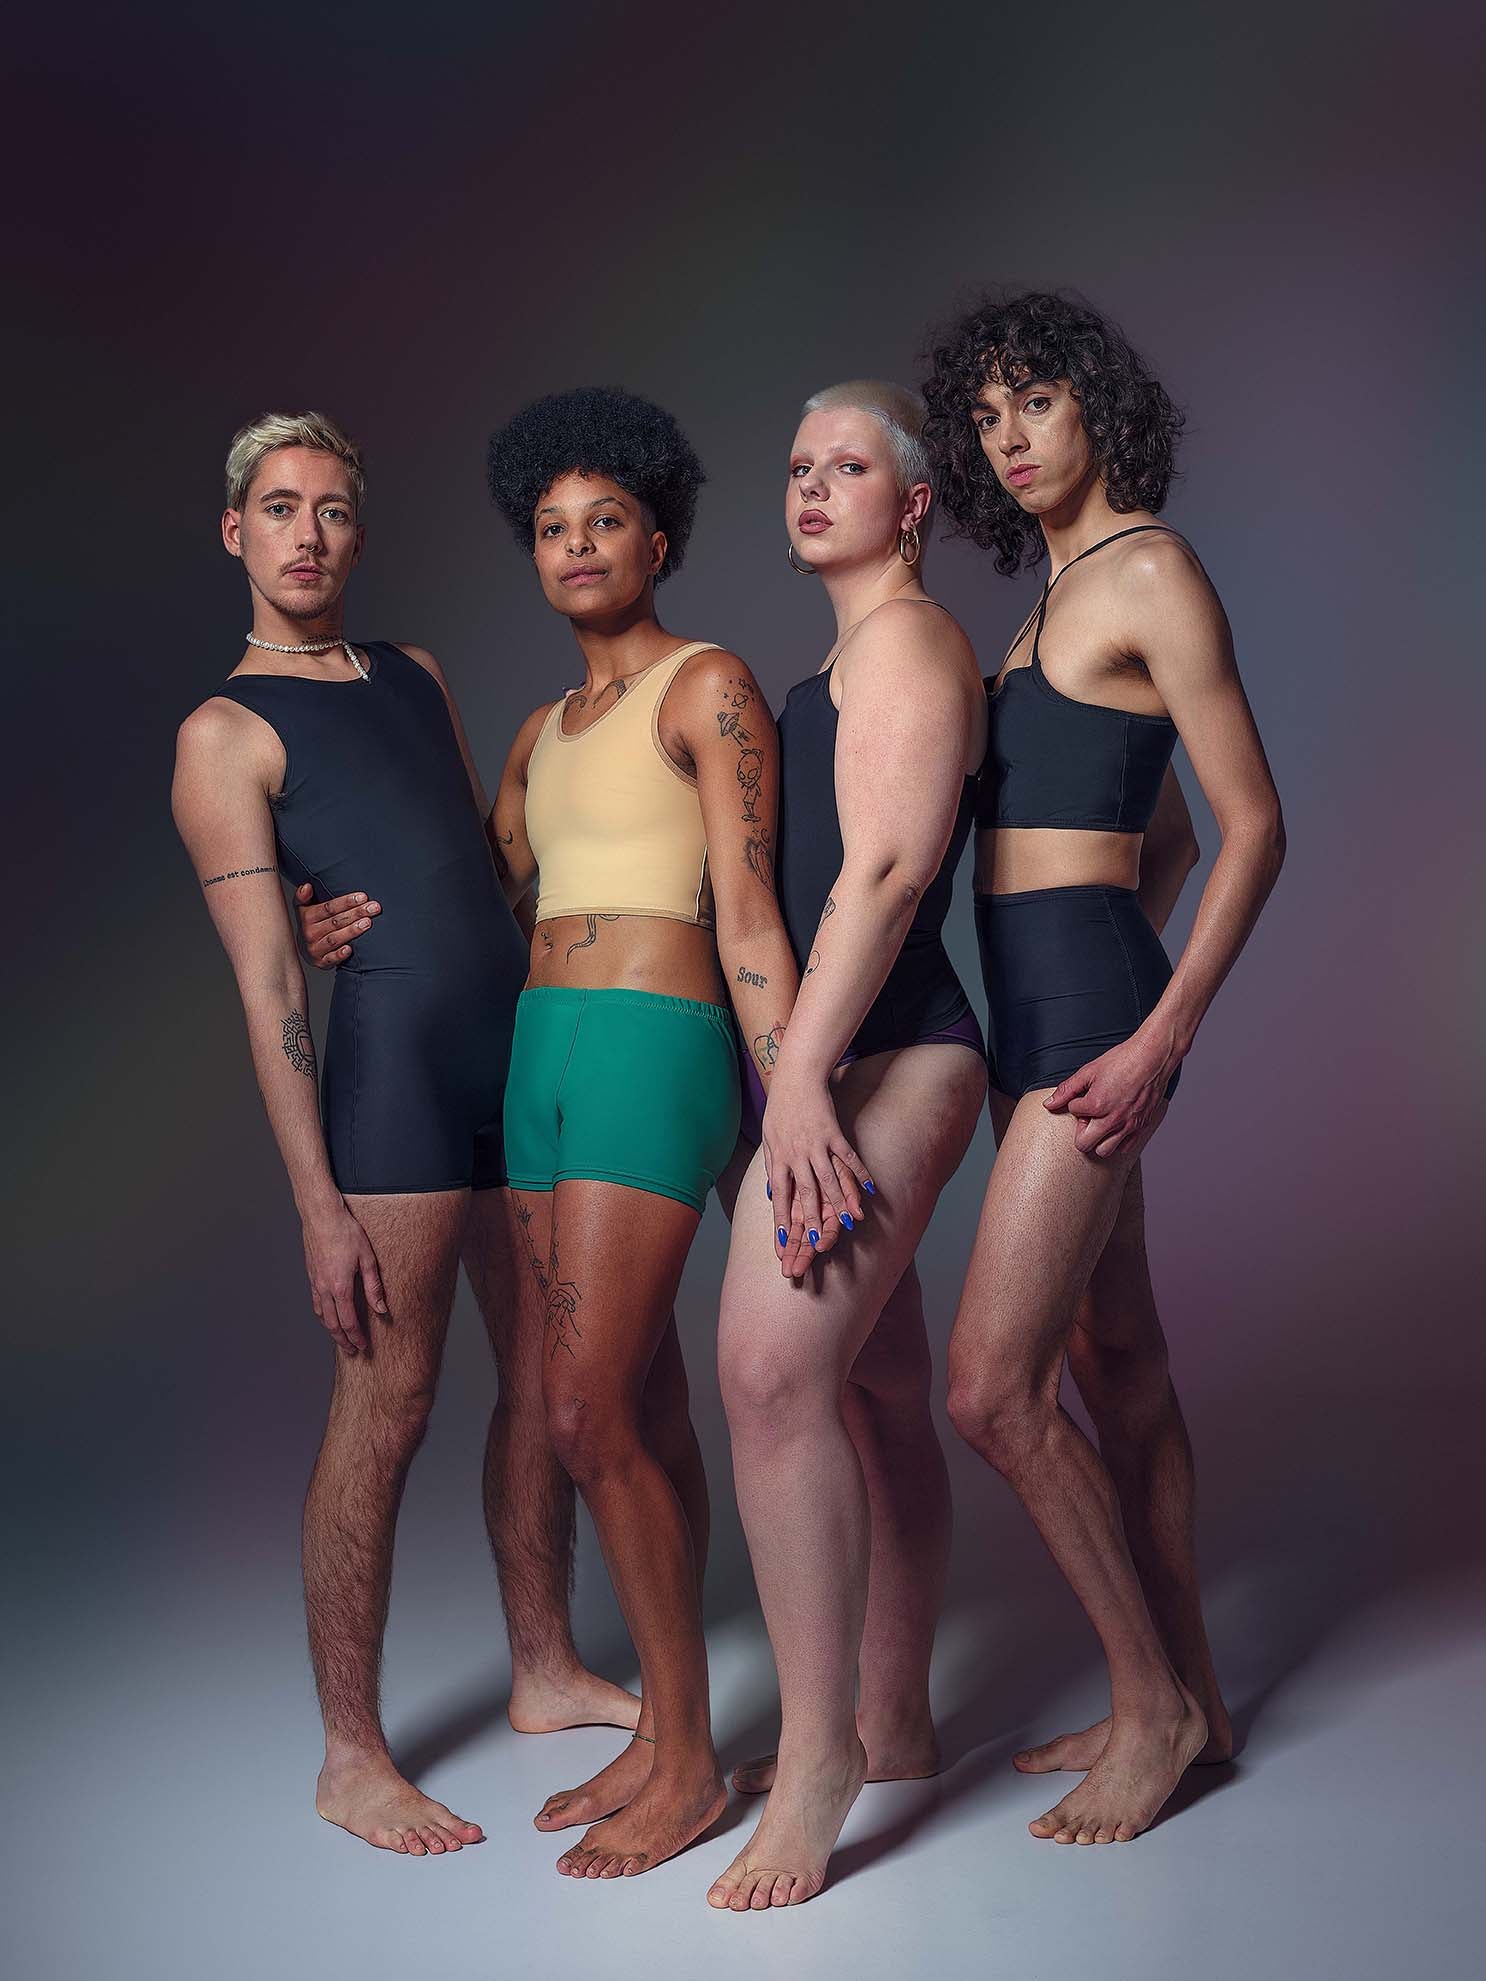 Our group of nonbinary, trans / transgender and transfem models. They are wearing our trans swimwear, chest binders, tucking undies and trans bikinis and they look wonderful! They are holding hands.